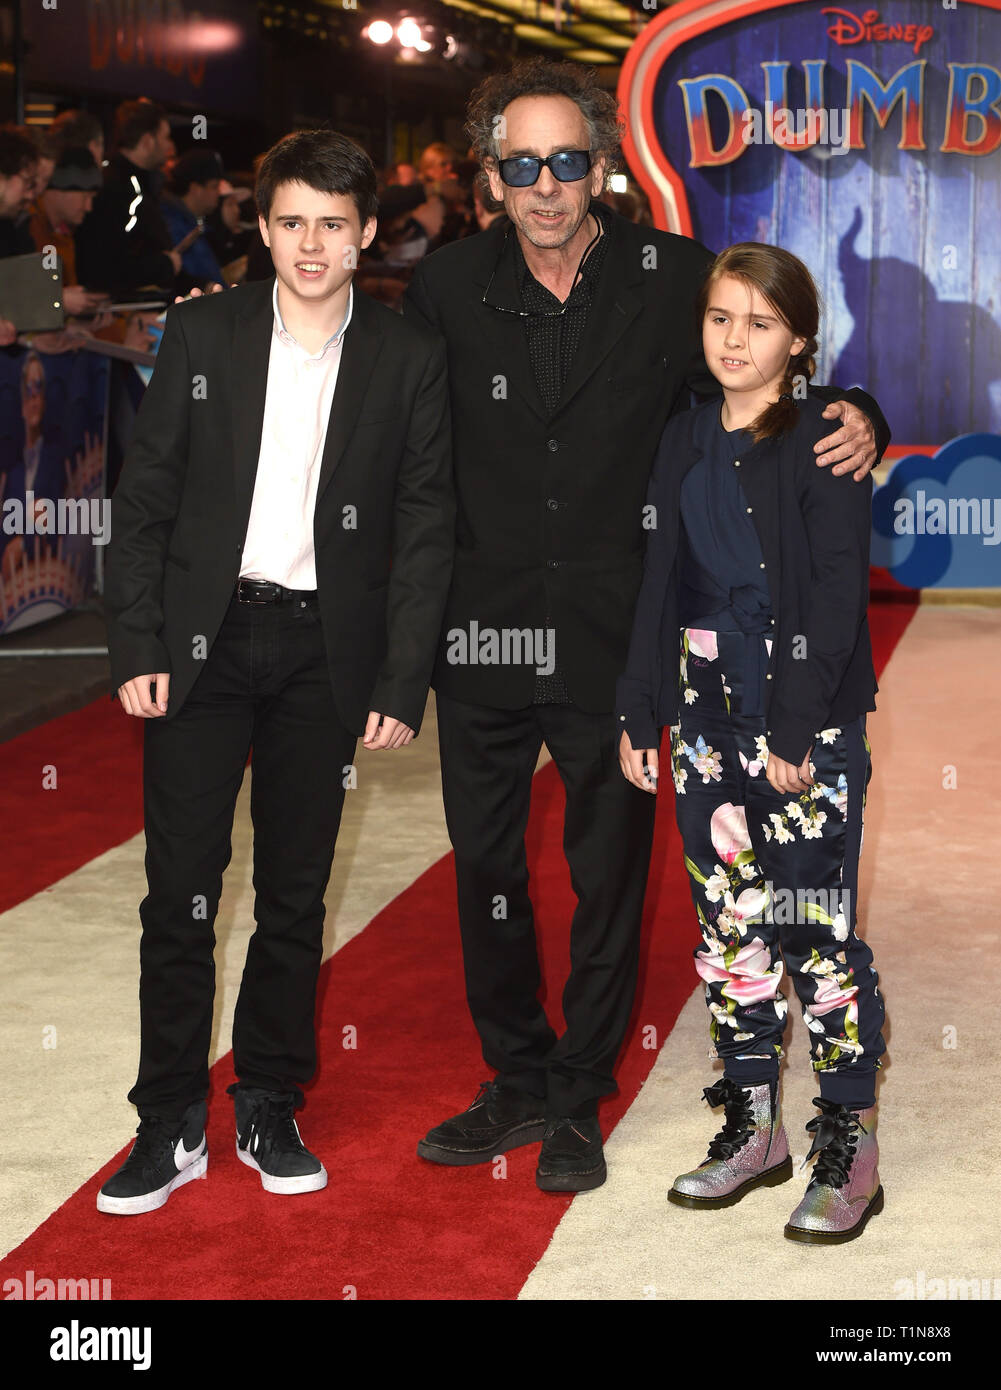 Photo Must Be Credited ©Alpha Press 079965 21/03/2019 Tim Burton and Children Dumbo Premiere At Curzon Mayfair London Stock Photo - Alamy